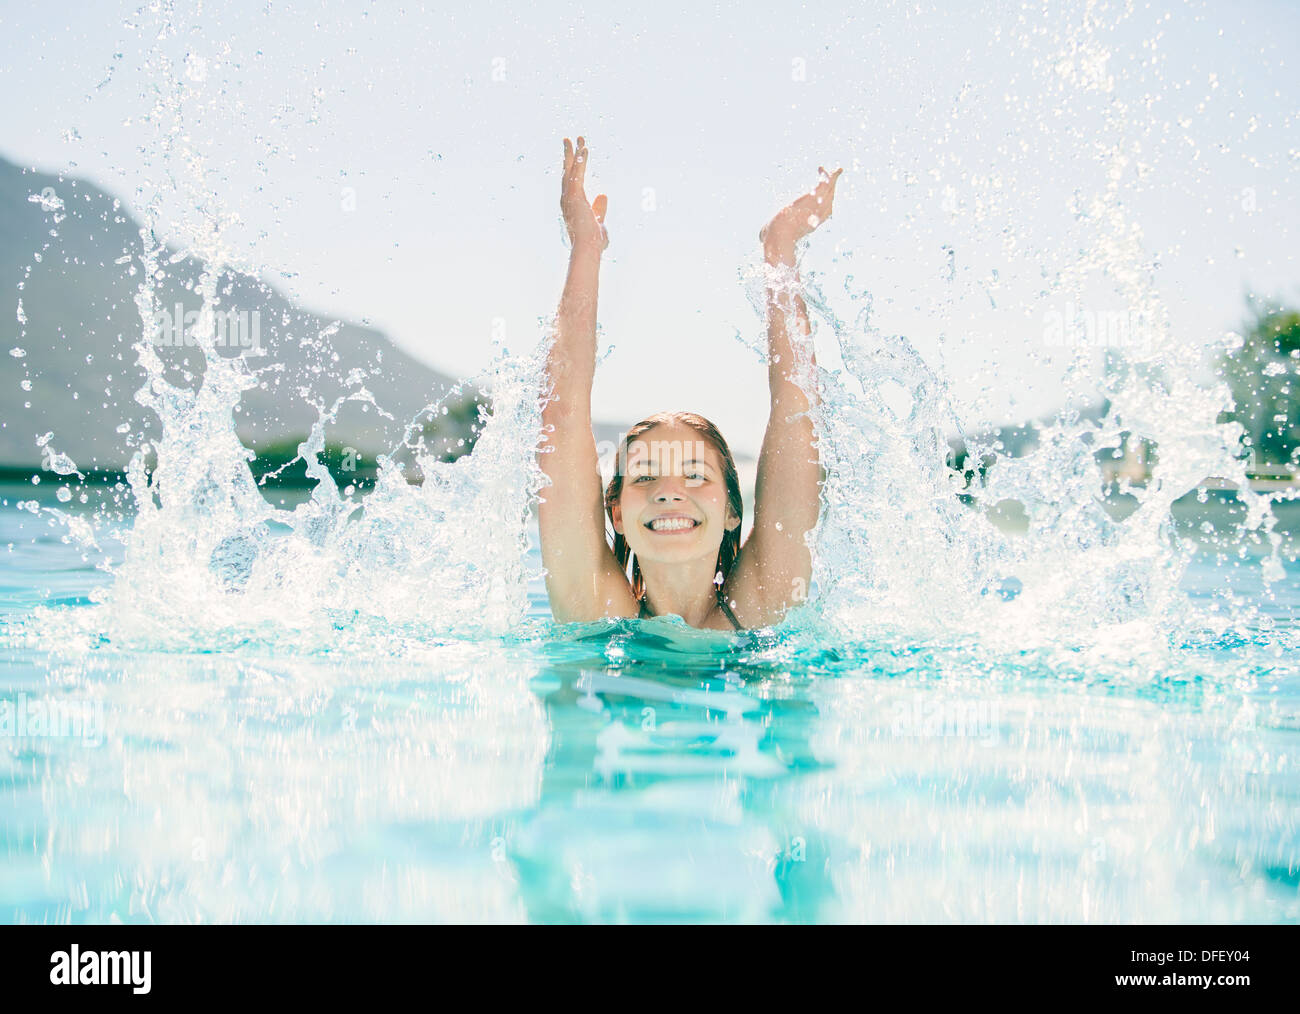 Woman splashing in swimming pool Banque D'Images